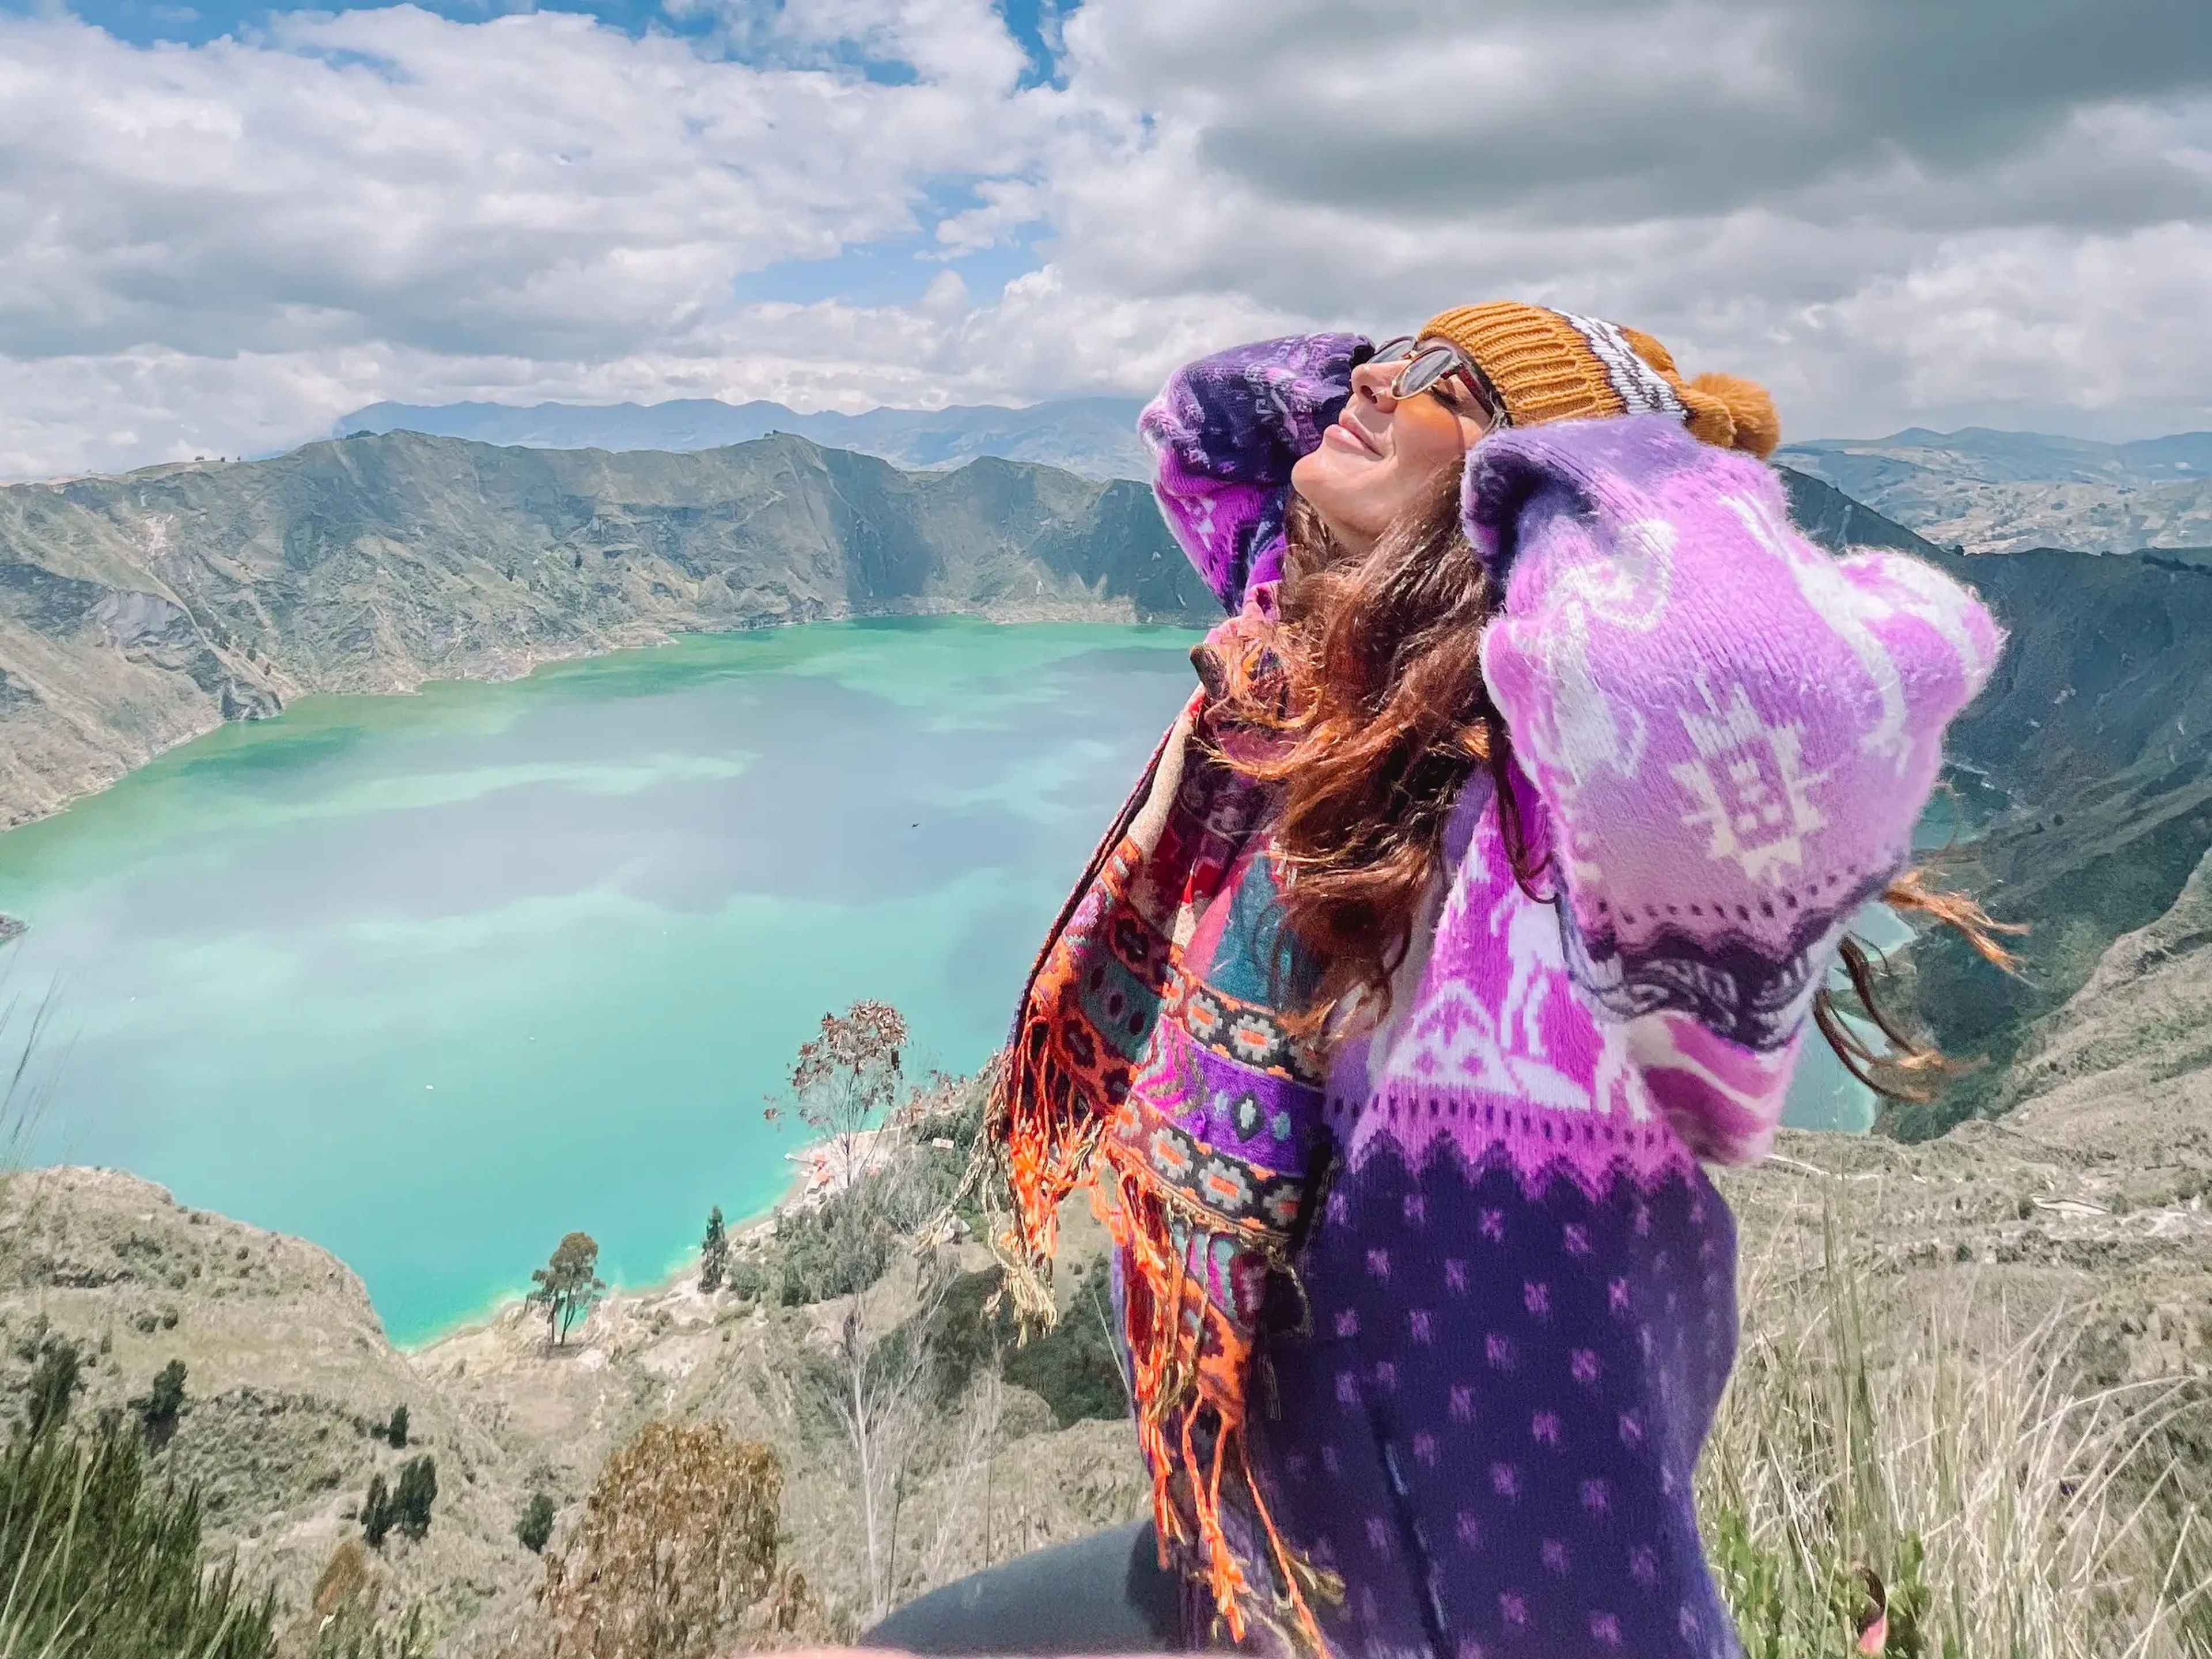 Kate Boardman wears a pink and purple sweater, sunglasses, and a colorful scarf, while standing at the rim of a cliff looking down to a body of water.